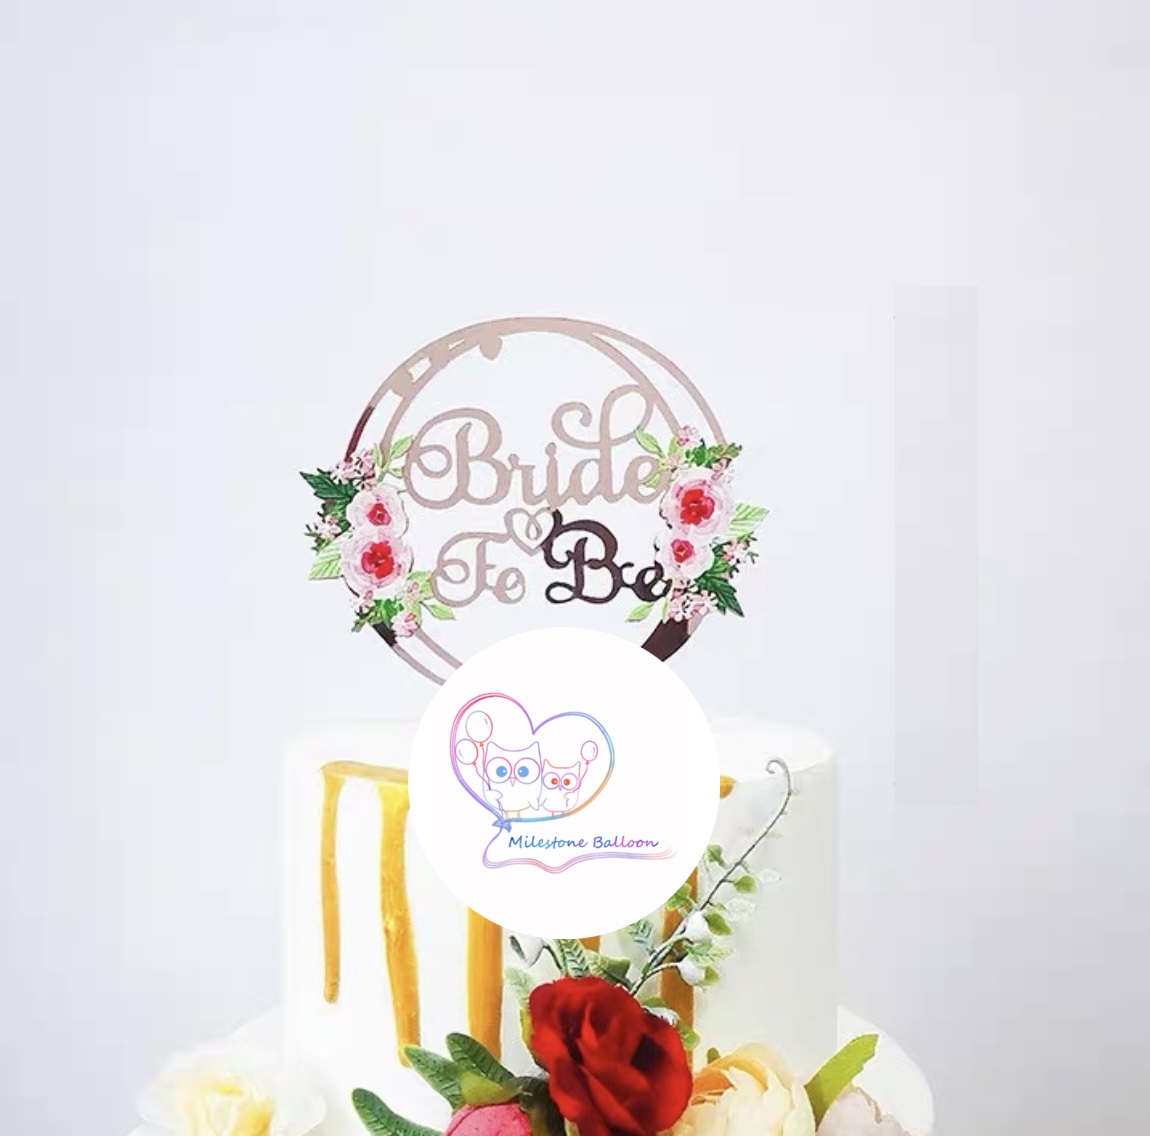 (Bridal Shower Cake Topper) Bride To Be 蛋糕牌 (玫瑰金色心) PECTS5-1